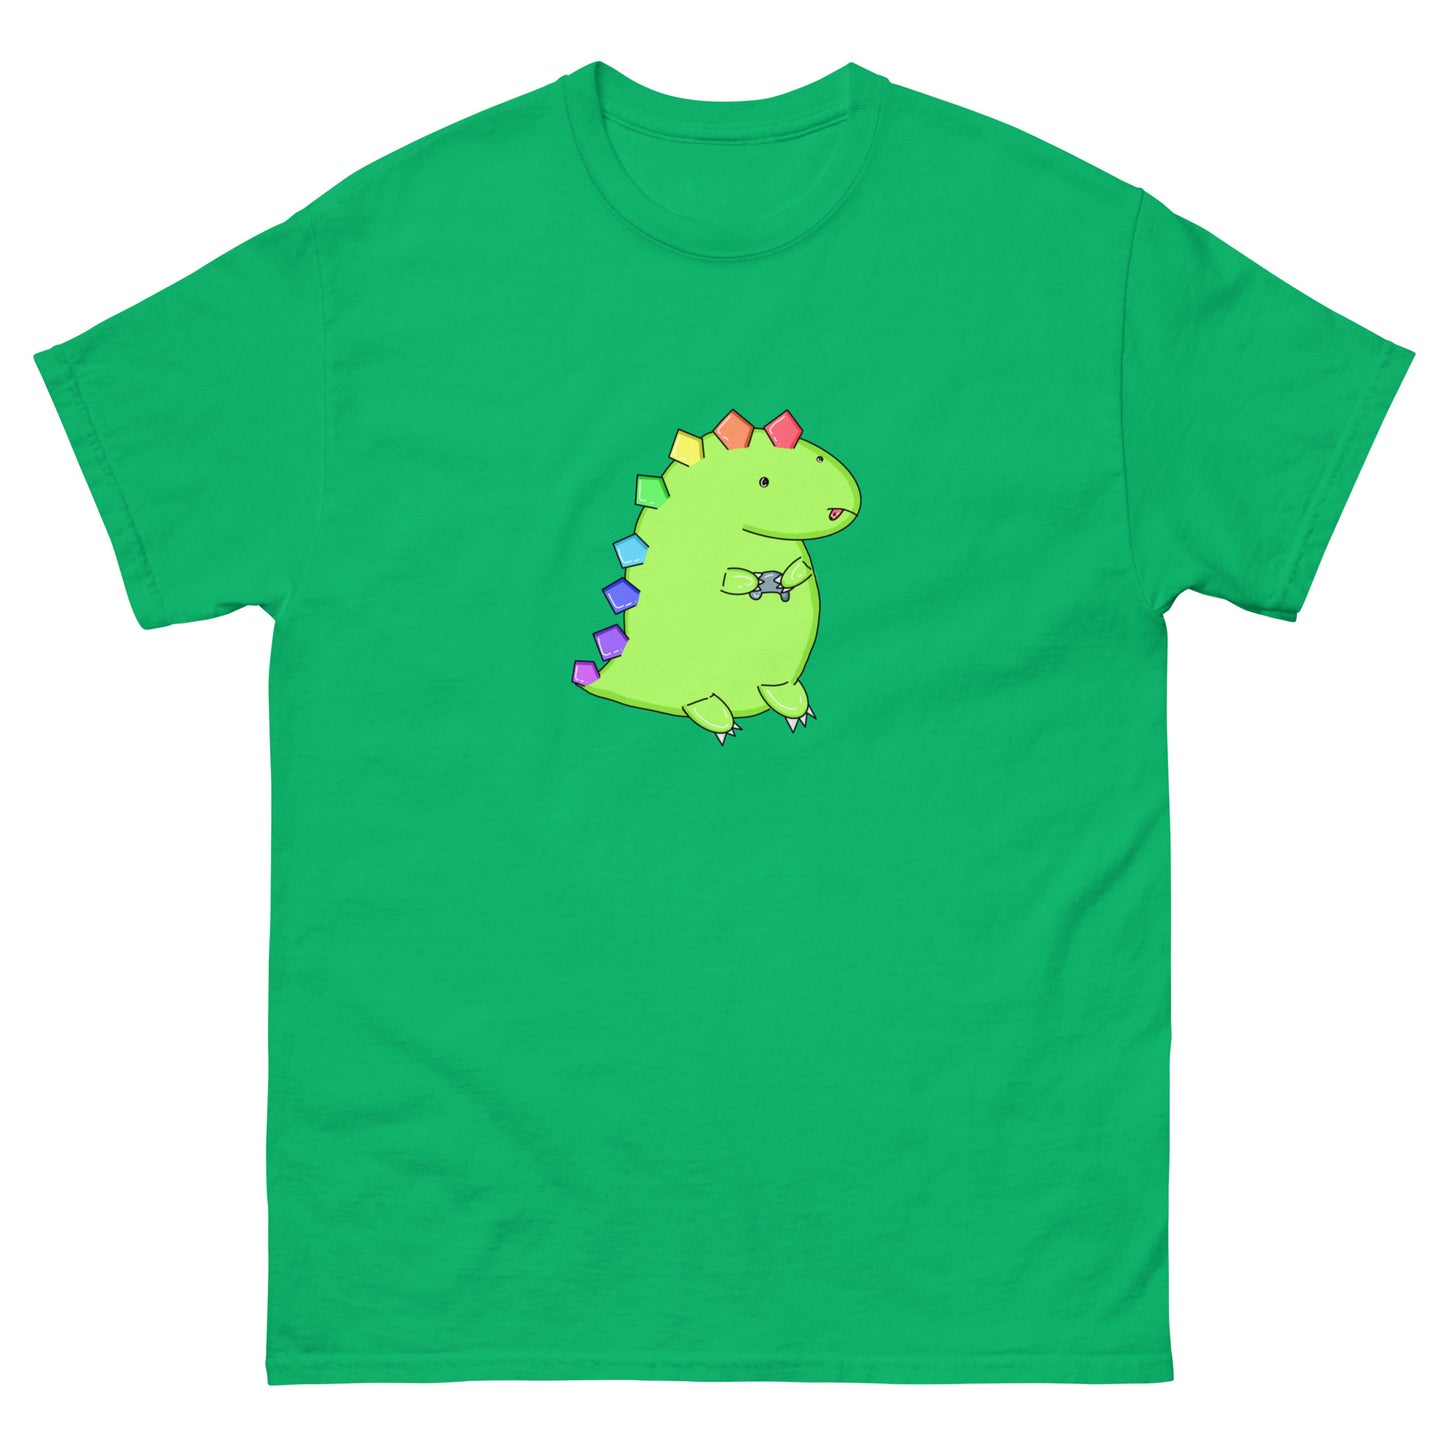 Gaming Dino Tee - ADULT SIZES - Designed Exclusively for Virtual Legality by the Littlest Hoegling